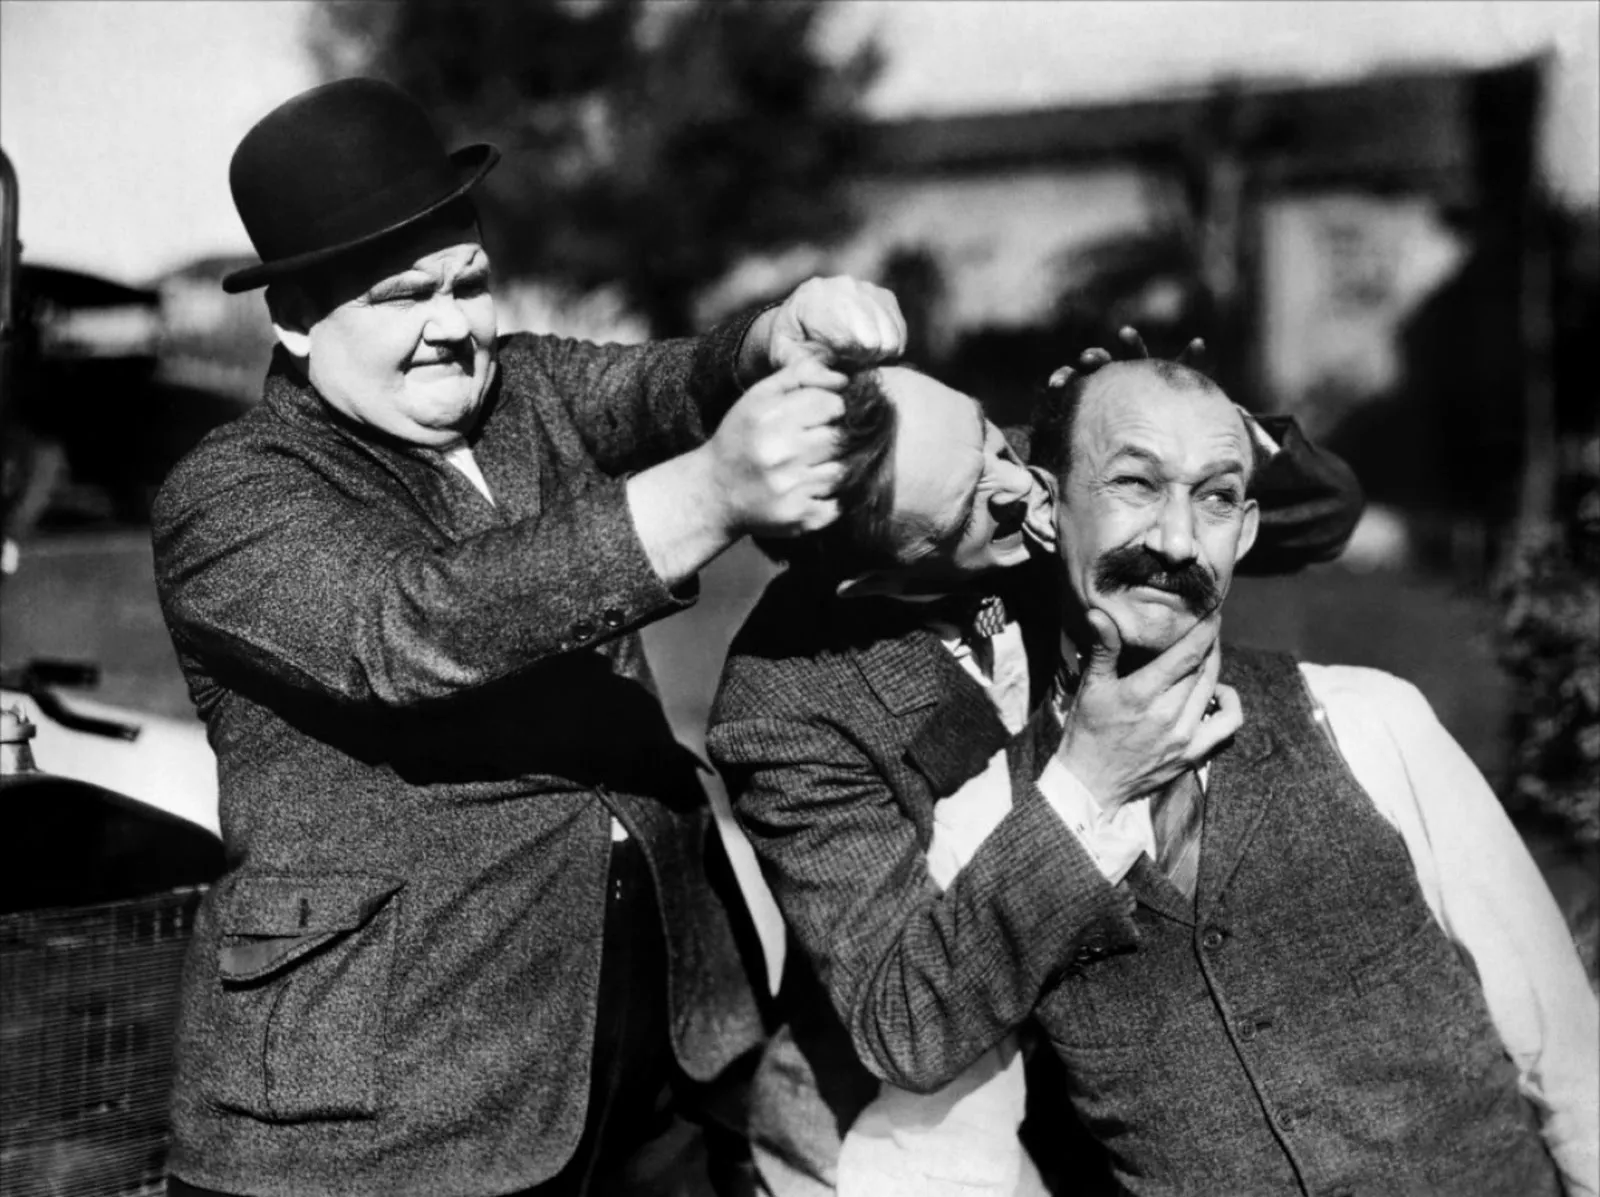 LAUREL AND HARDY: FROM ULVERSTON TO HOLLYWOOD